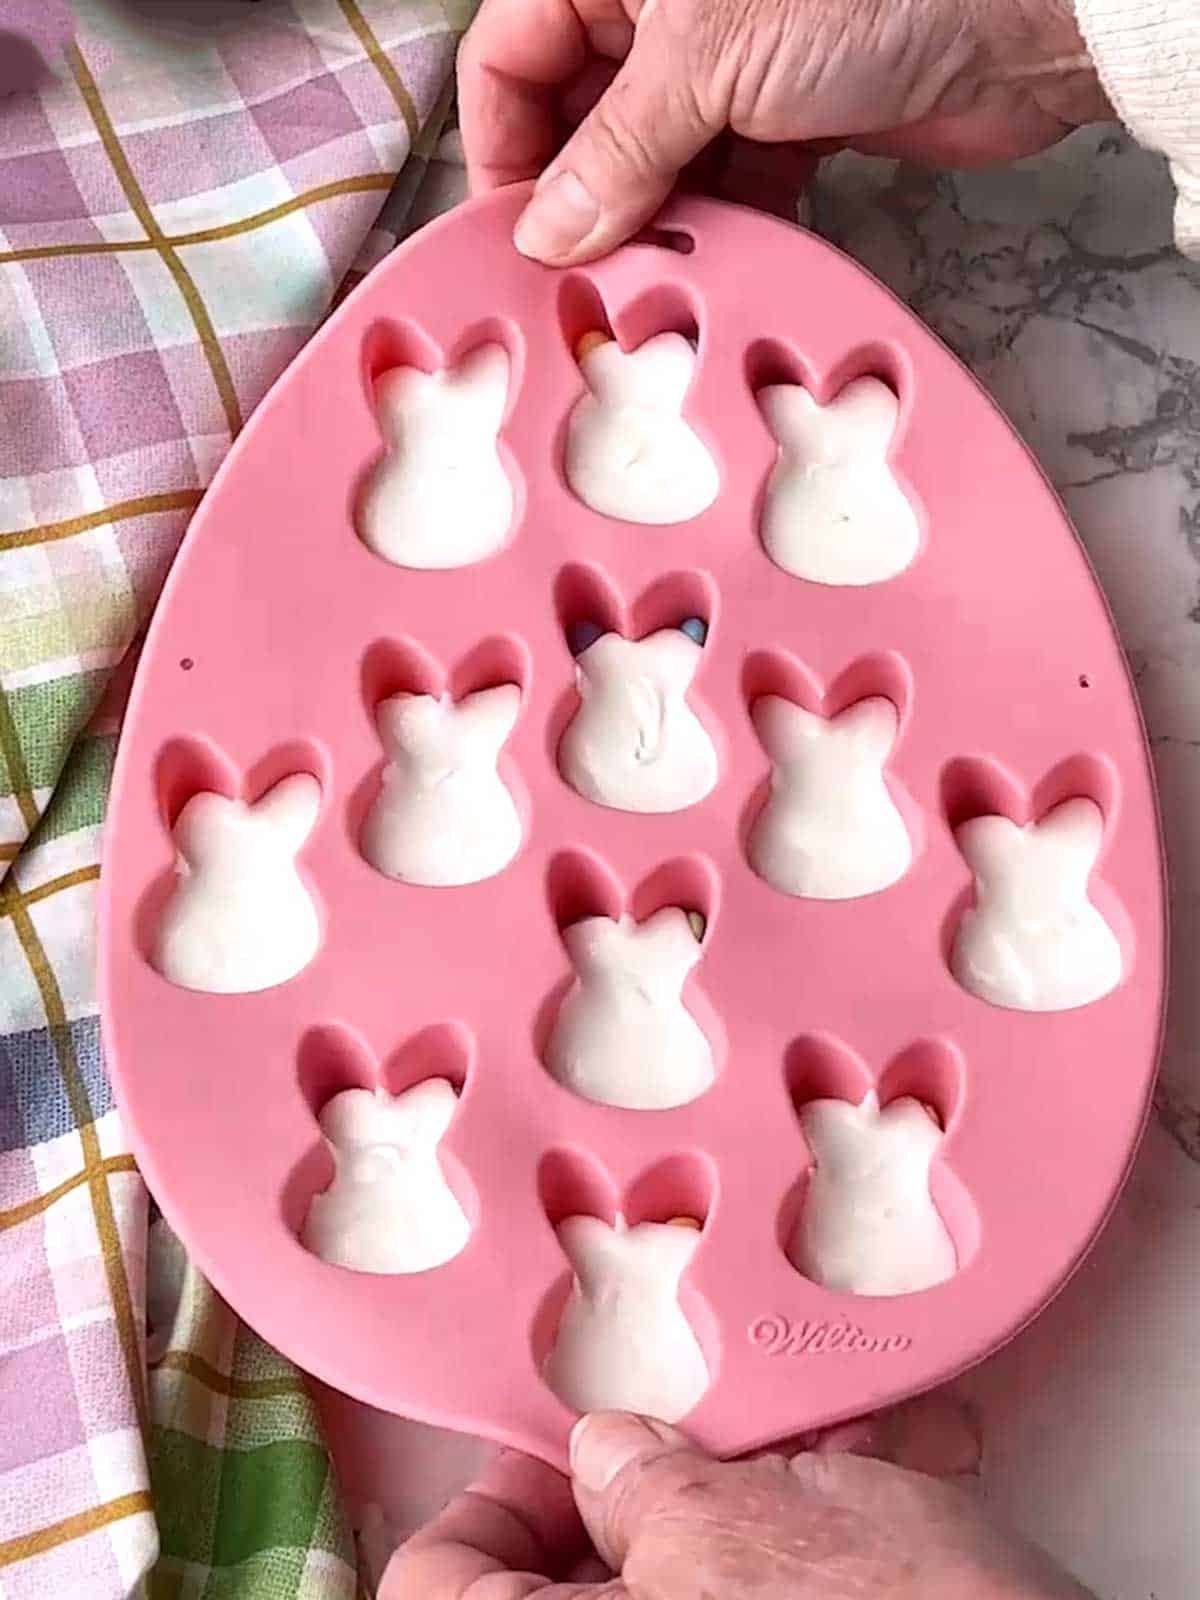 Tapping the bunny pan to distribute the melted candy melts.